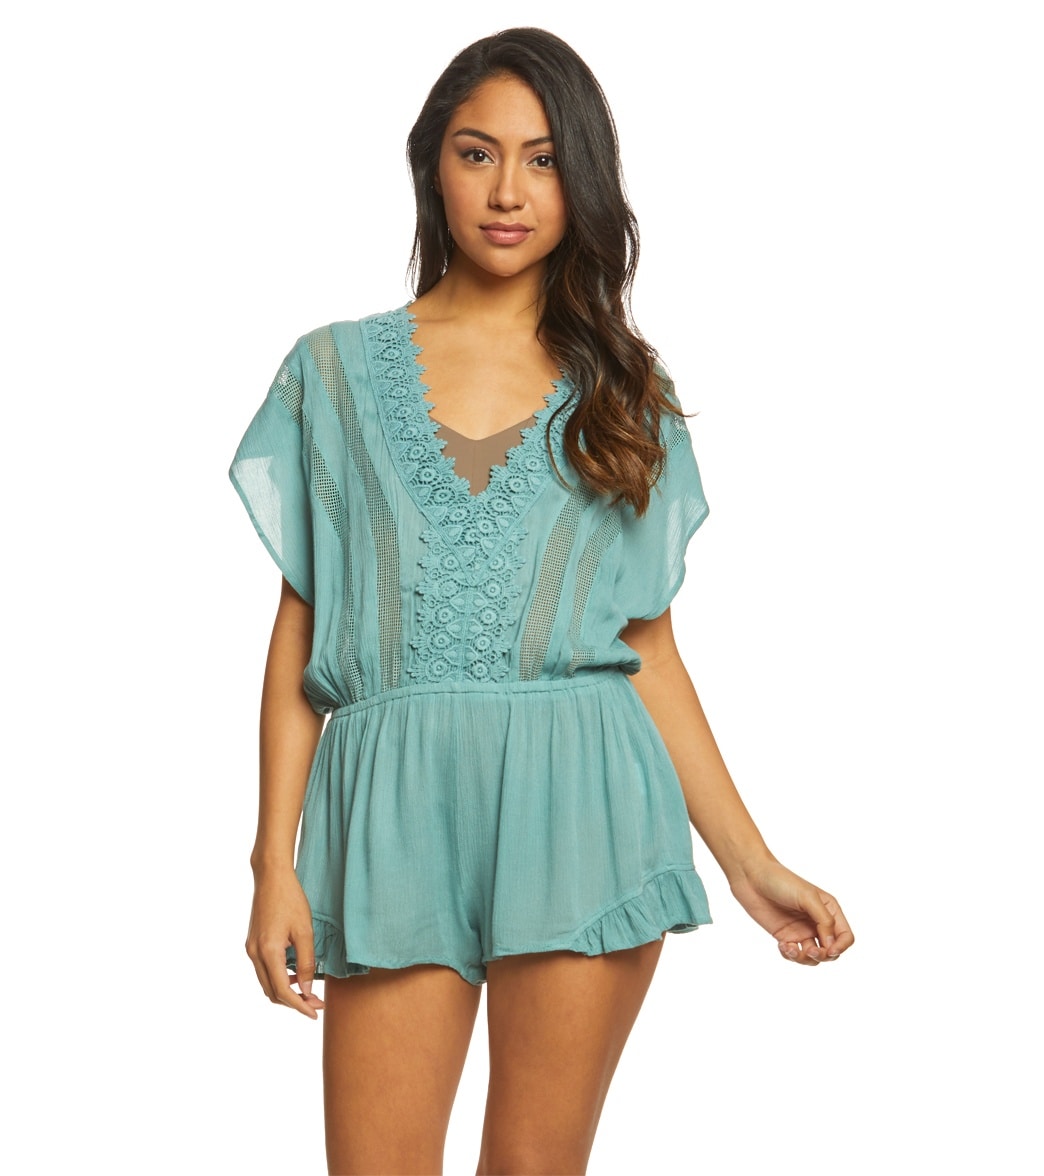 O'Neill Shay Cover Up Romper at SwimOutlet.com - Free Shipping